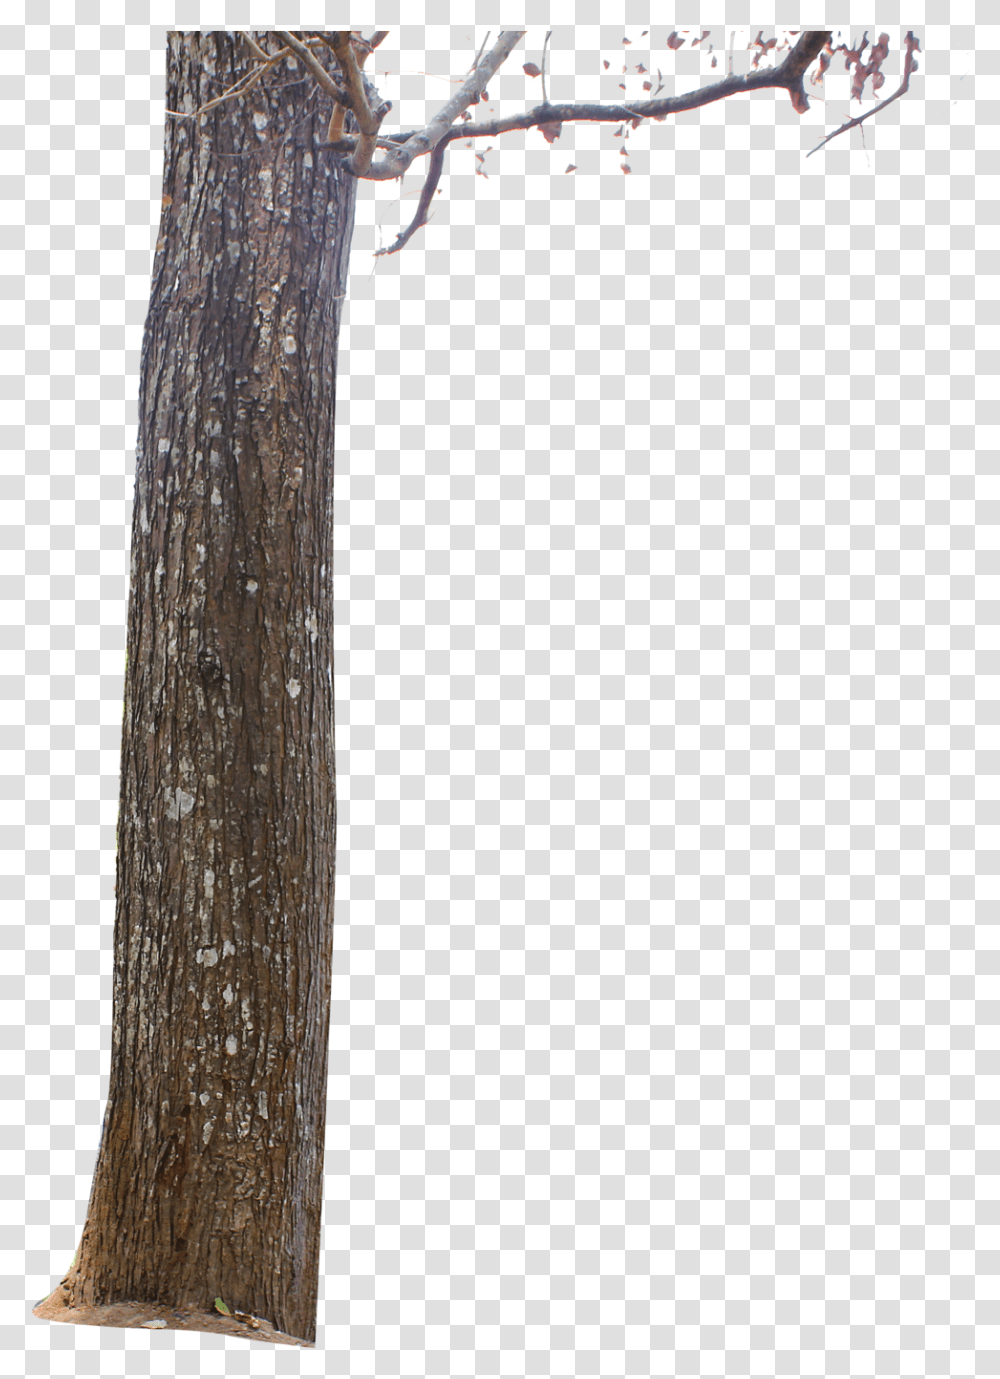 Tree Bark Picture Tree For Picsart, Plant, Tree Trunk, Animal, Bird Transparent Png